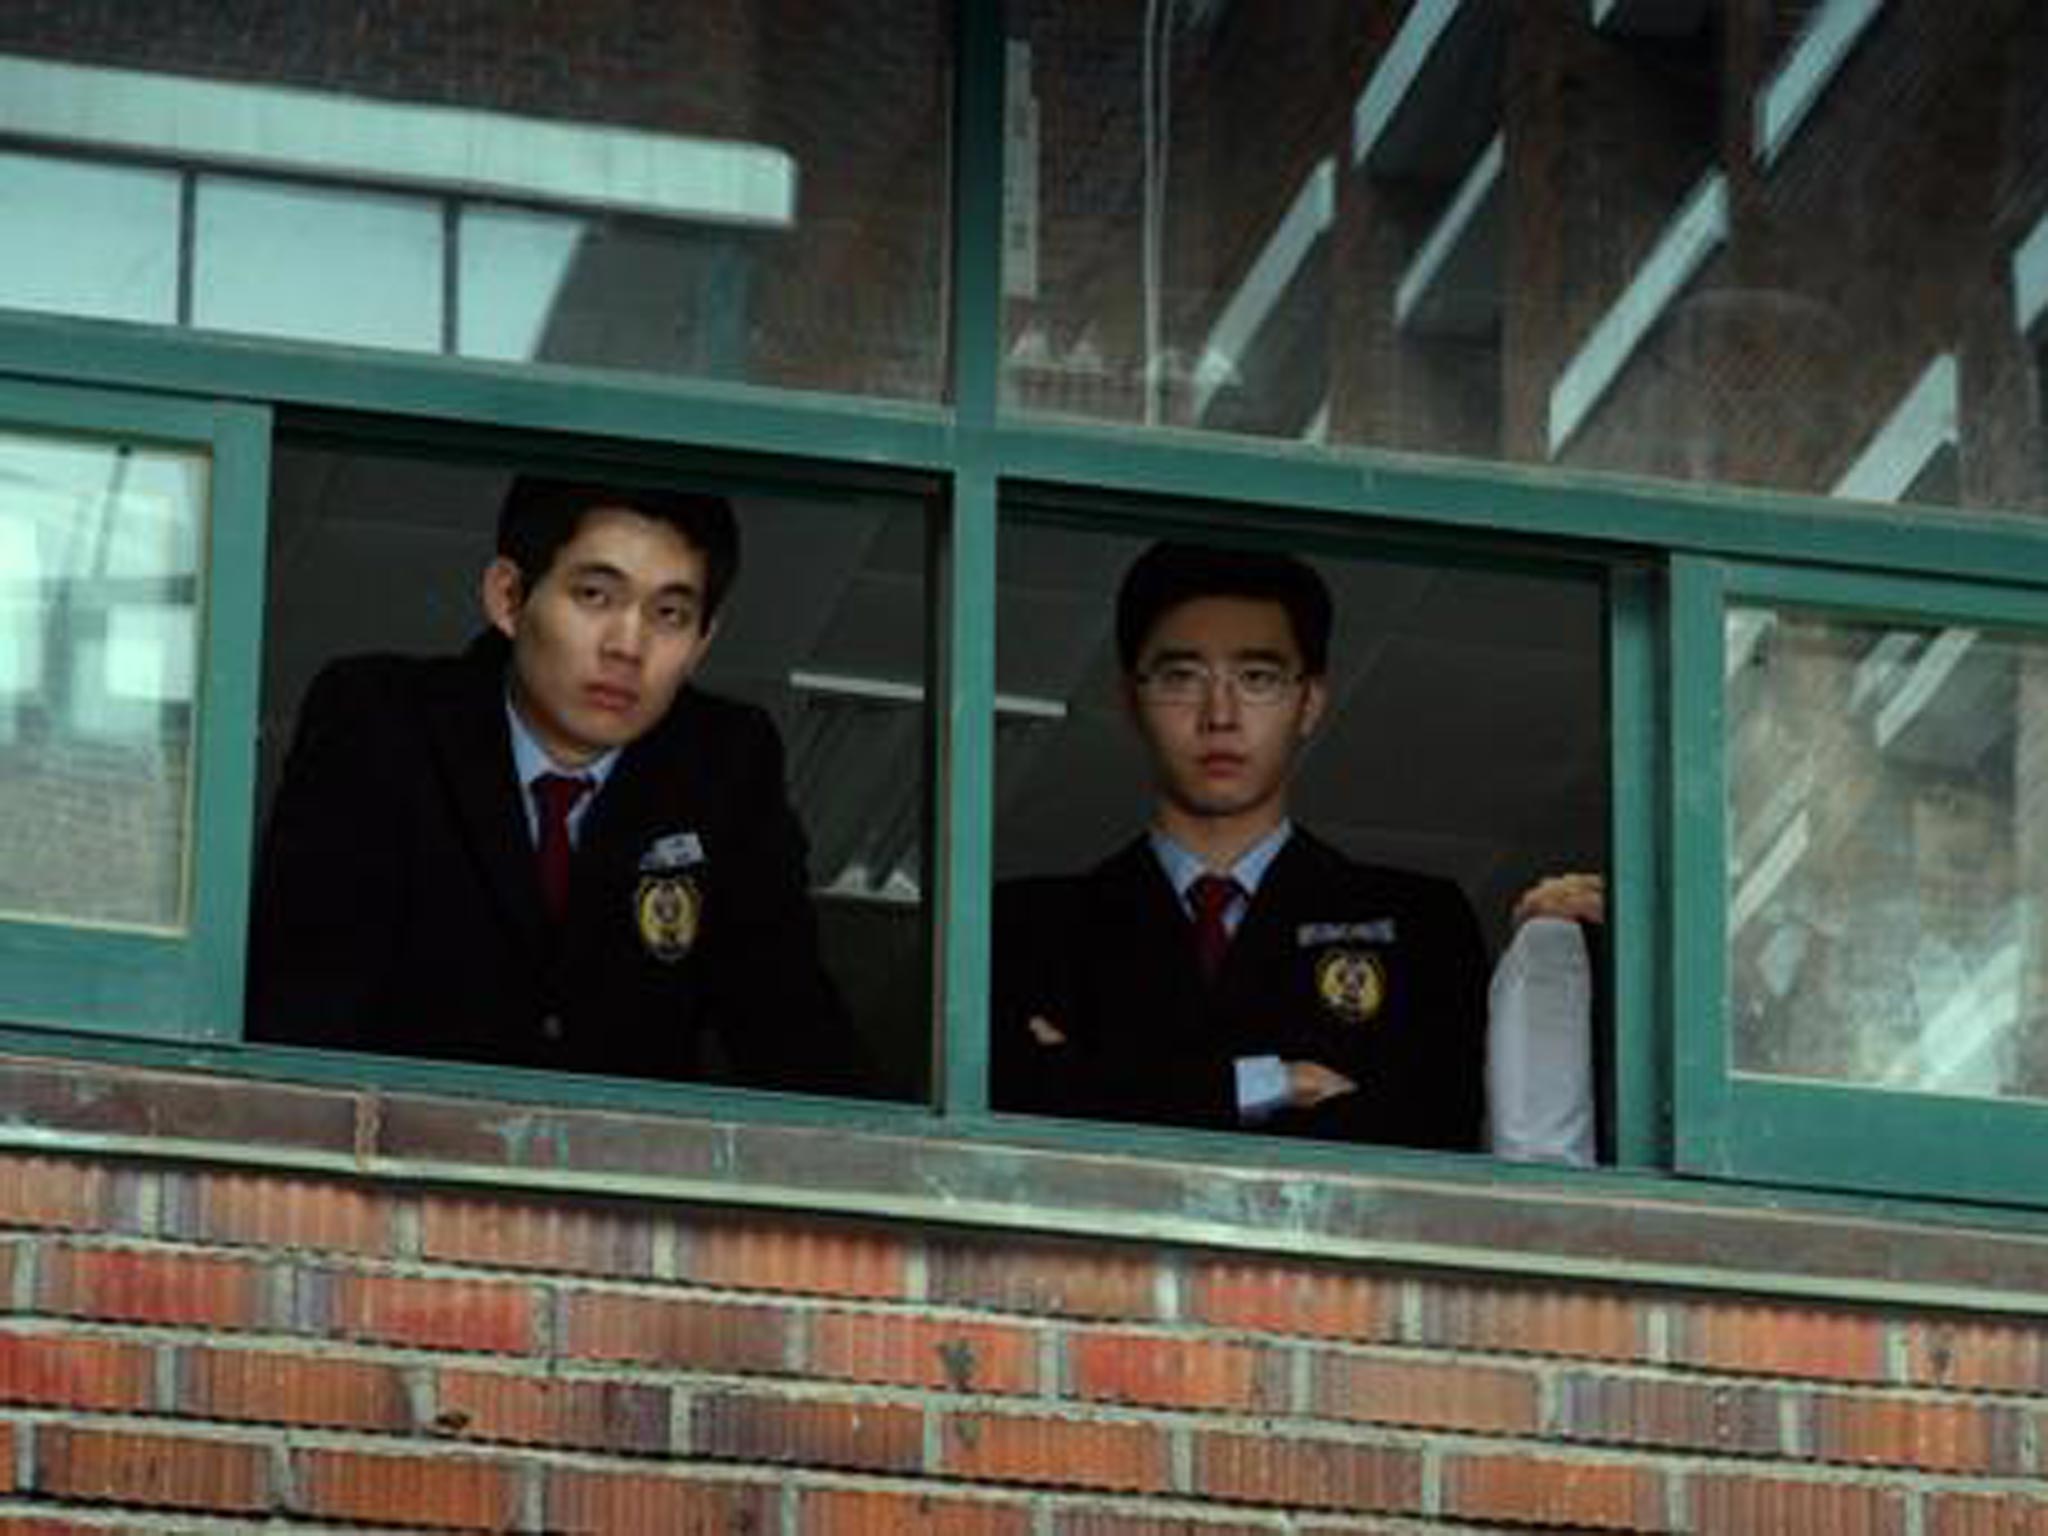 'Pluto': a grim cautionary tale about ultra-competitive students at a South Korean
school